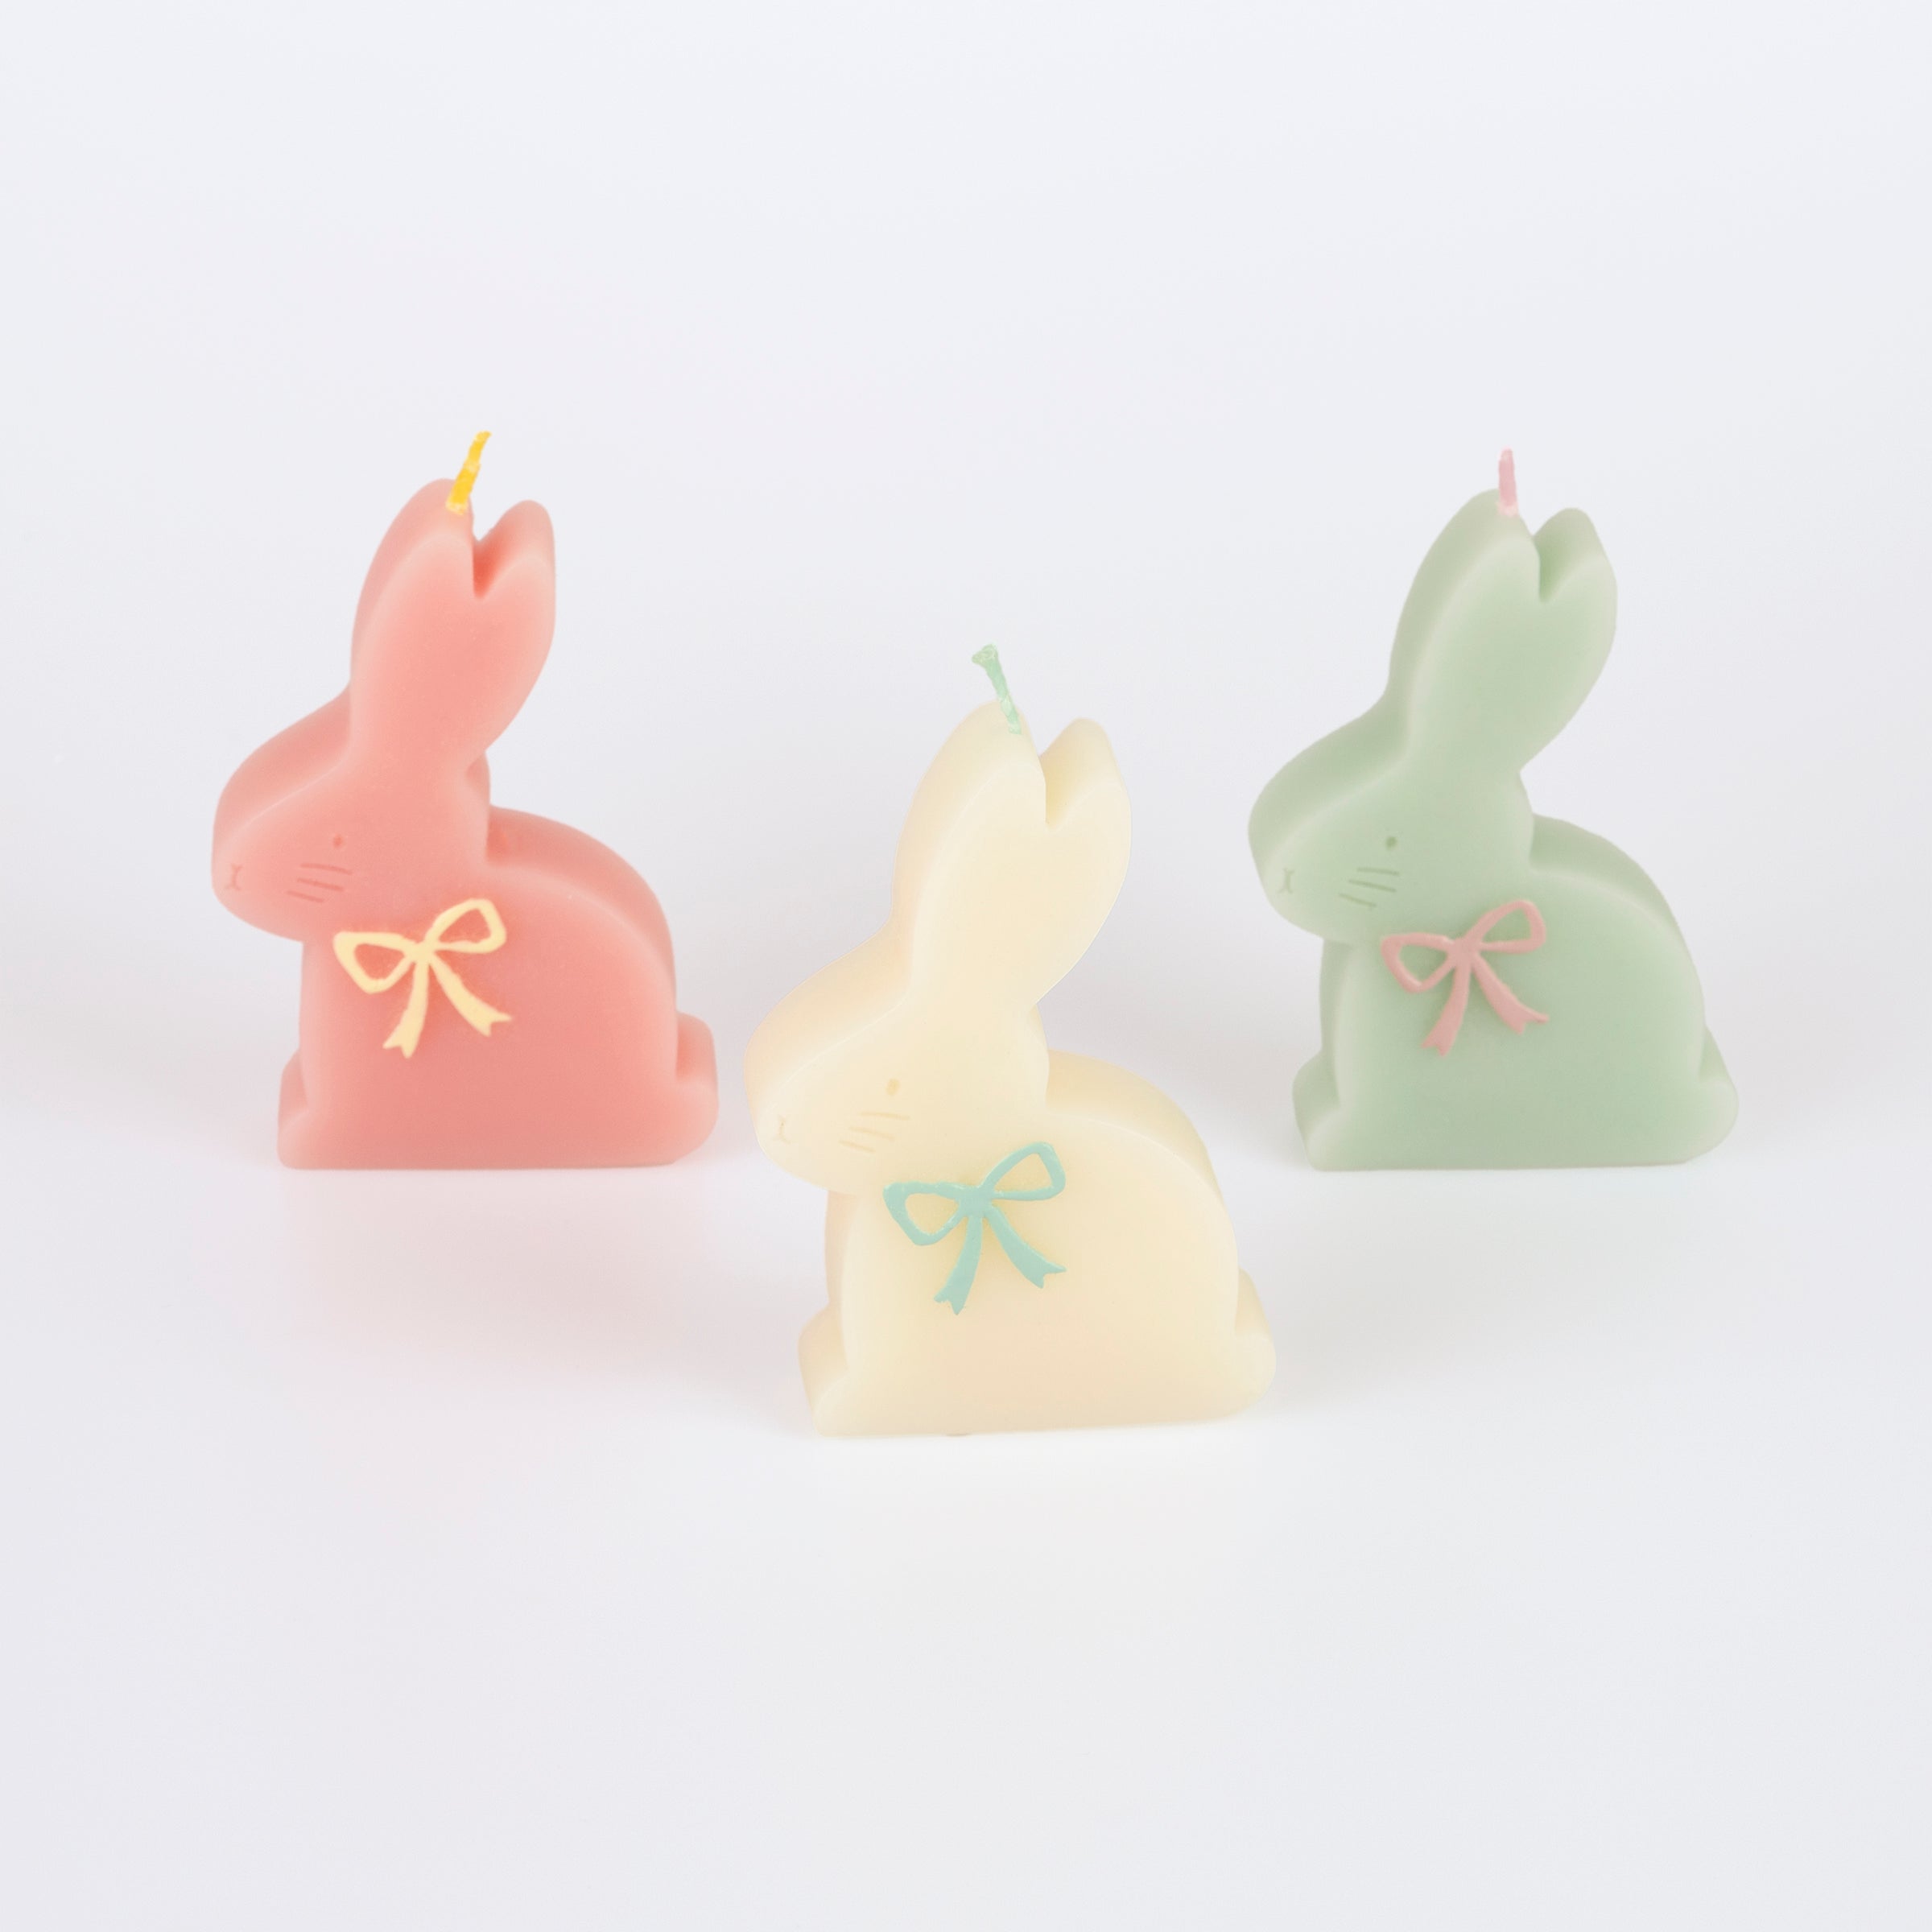 Our Easter candles, in the shape of bunnies with colored bows and wicks, are perfect for Easter cakes or as Easter decorations.